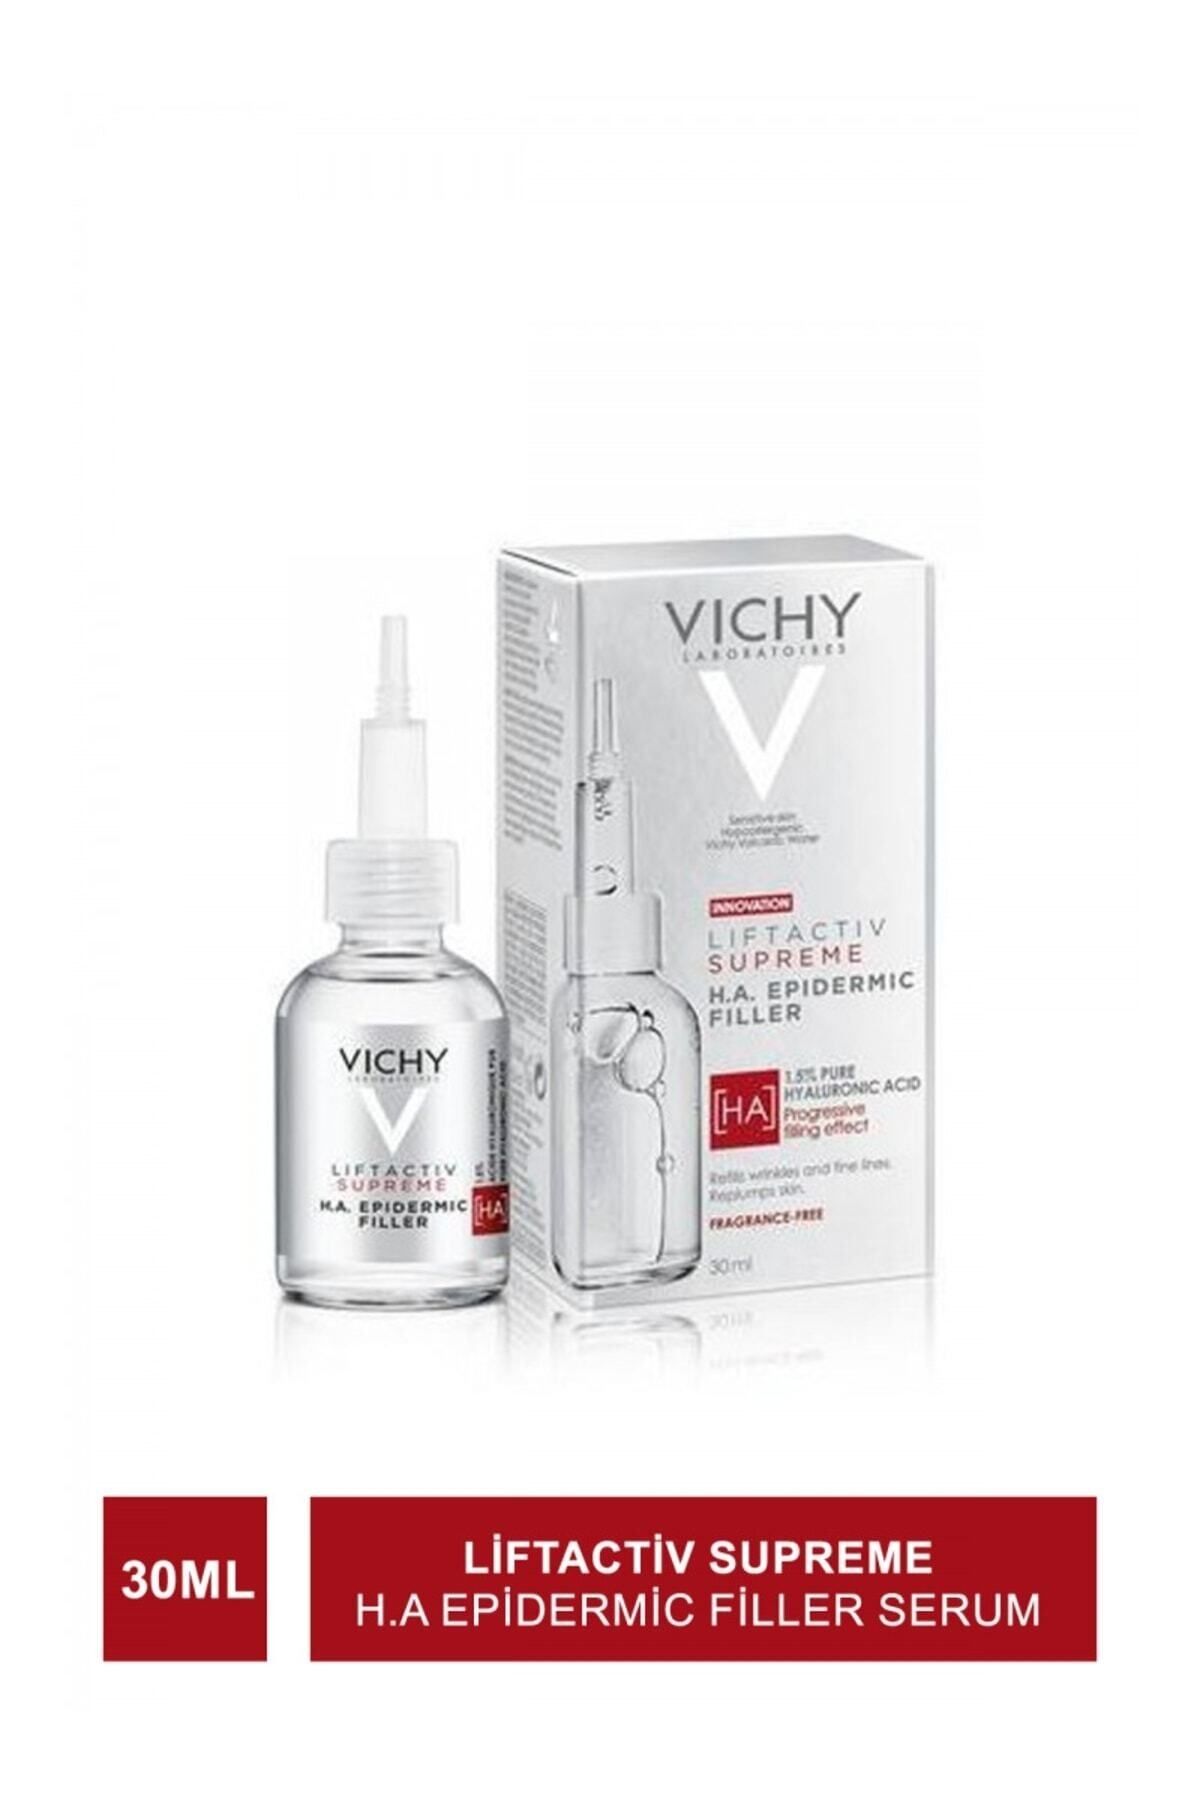 Vichy LİFTACTİV SUPREME H.A. EPİDERMİC FİLLER REVİTALİZİNG AND PLUMPİNG SERUM 30 ml DKHAİR160